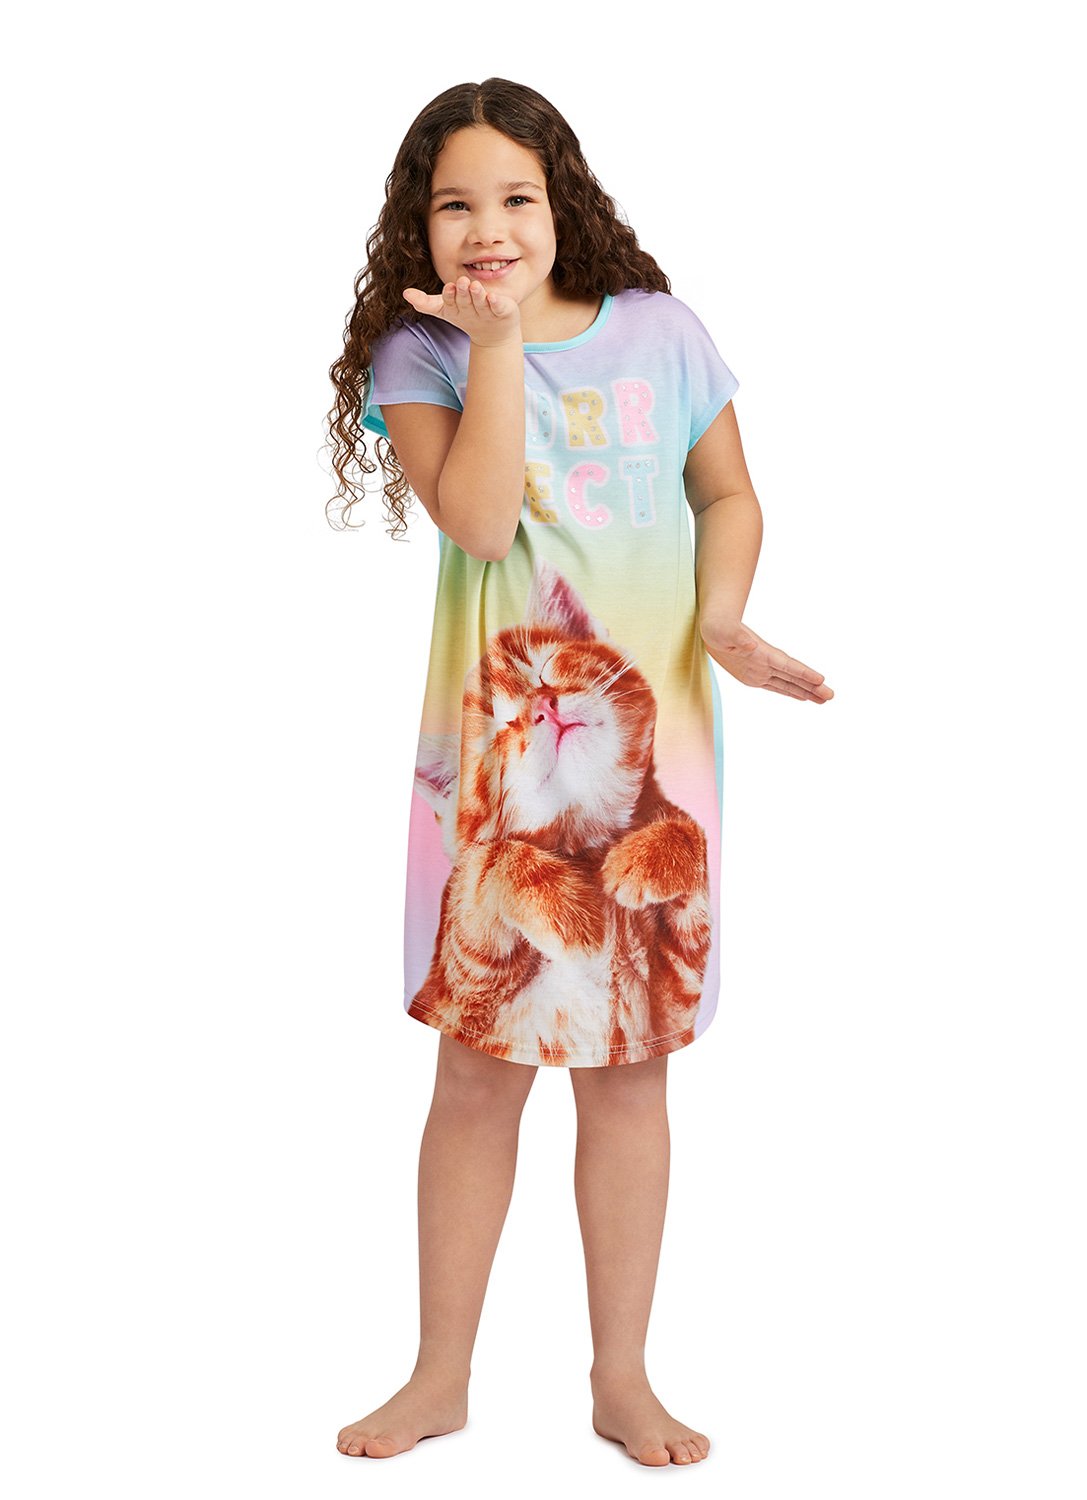 Girl sending a kiss a wearing Short Sleeve Pajama with Cat Glitter Print